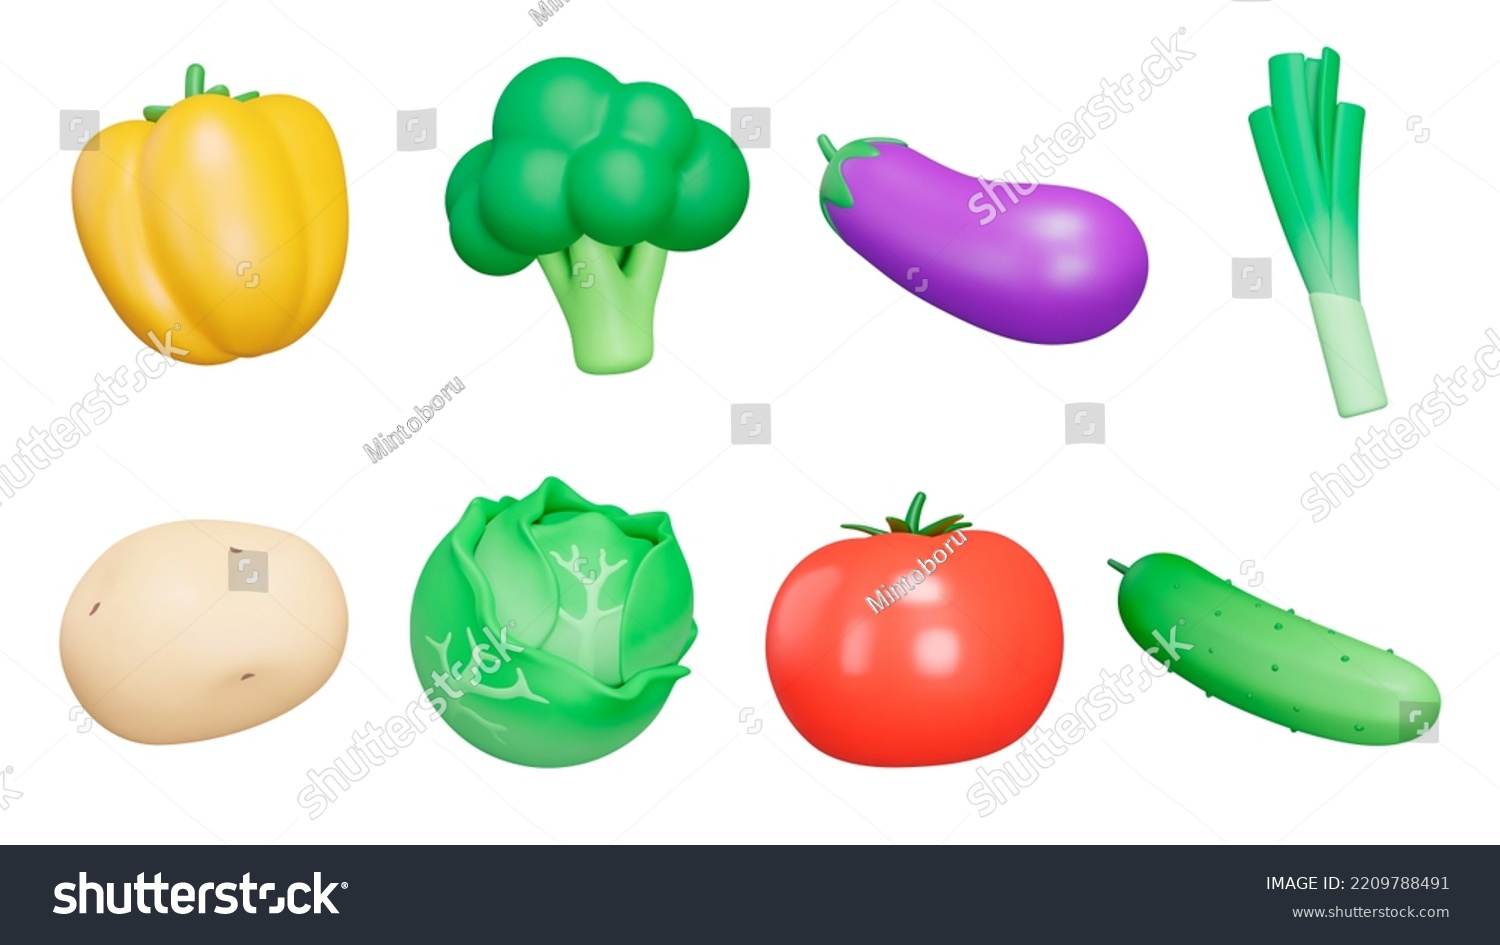 Vegetables 3d icon set. Bell pepper, broccoli, eggplant, leeks, potatoes, cabbage, tomato, cucumber. Isolated icons, objects on a transparent background #2209788491